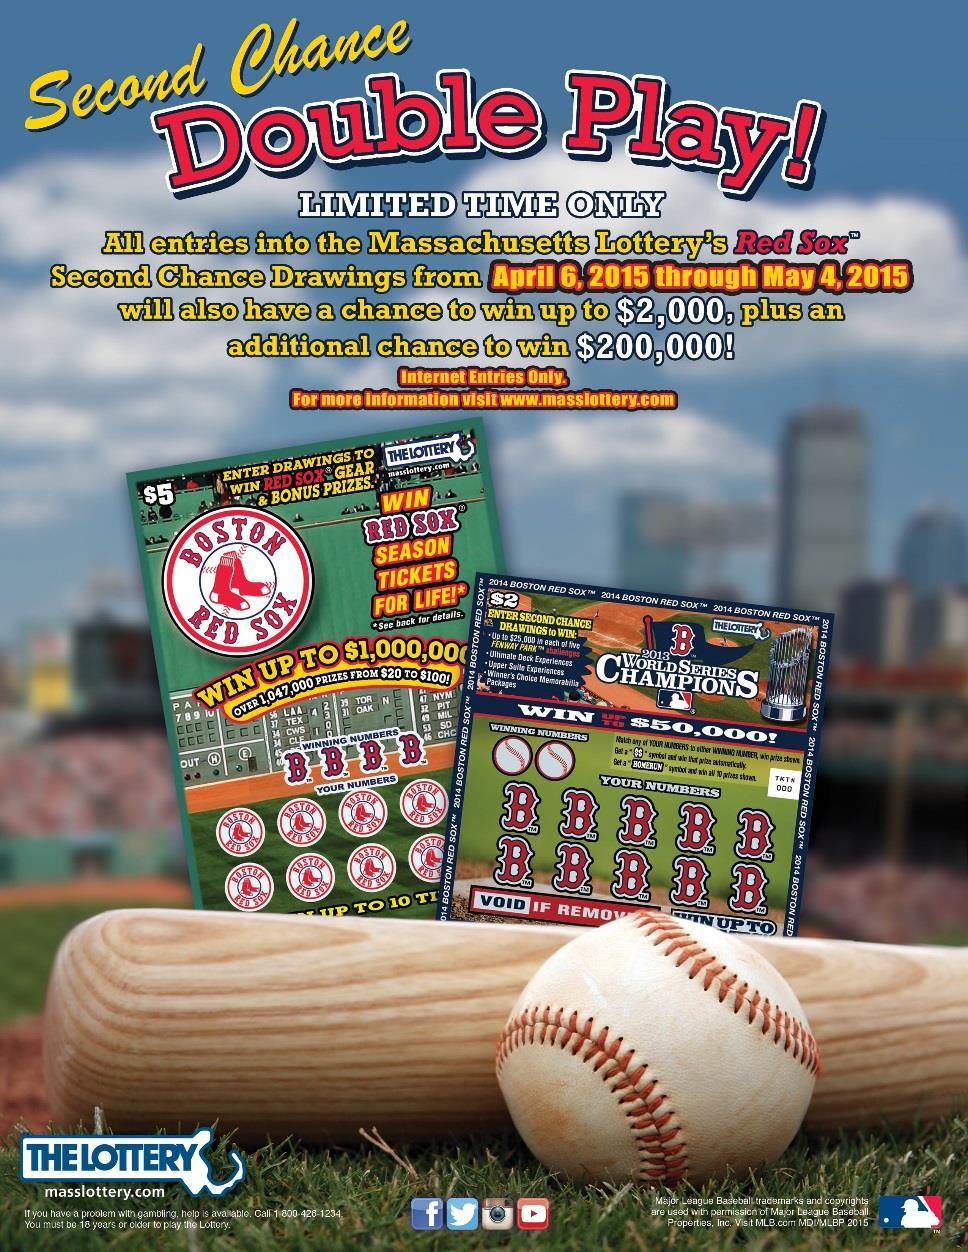 During the promotional period only, for each $2 Boston Red Sox Second Chance entry submitted, the player earns four (4) entries into the Double Play Promotion.